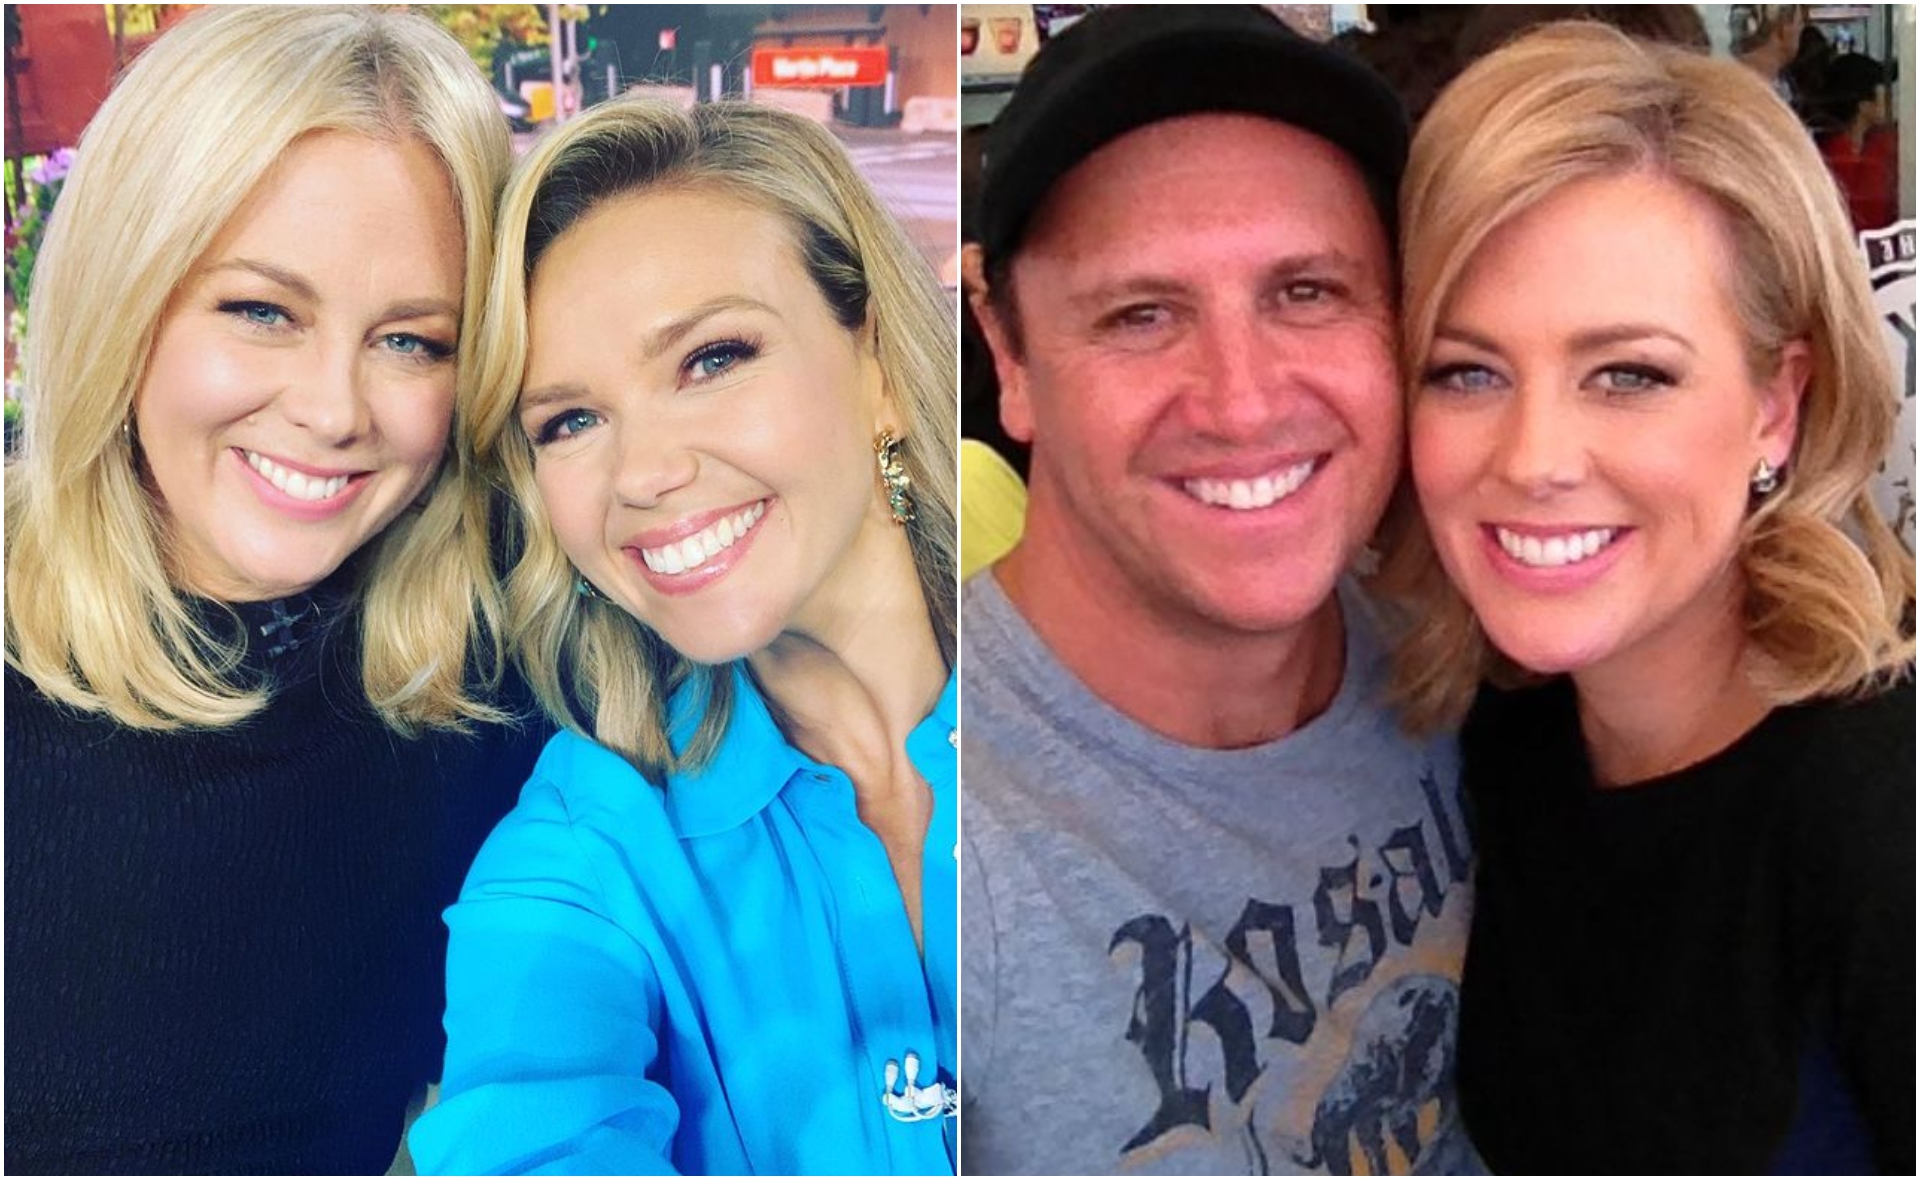 “You have been like a big sister to me”: Tributes flow for Sam Armytage as she departs Sunrise for new, brighter horizons